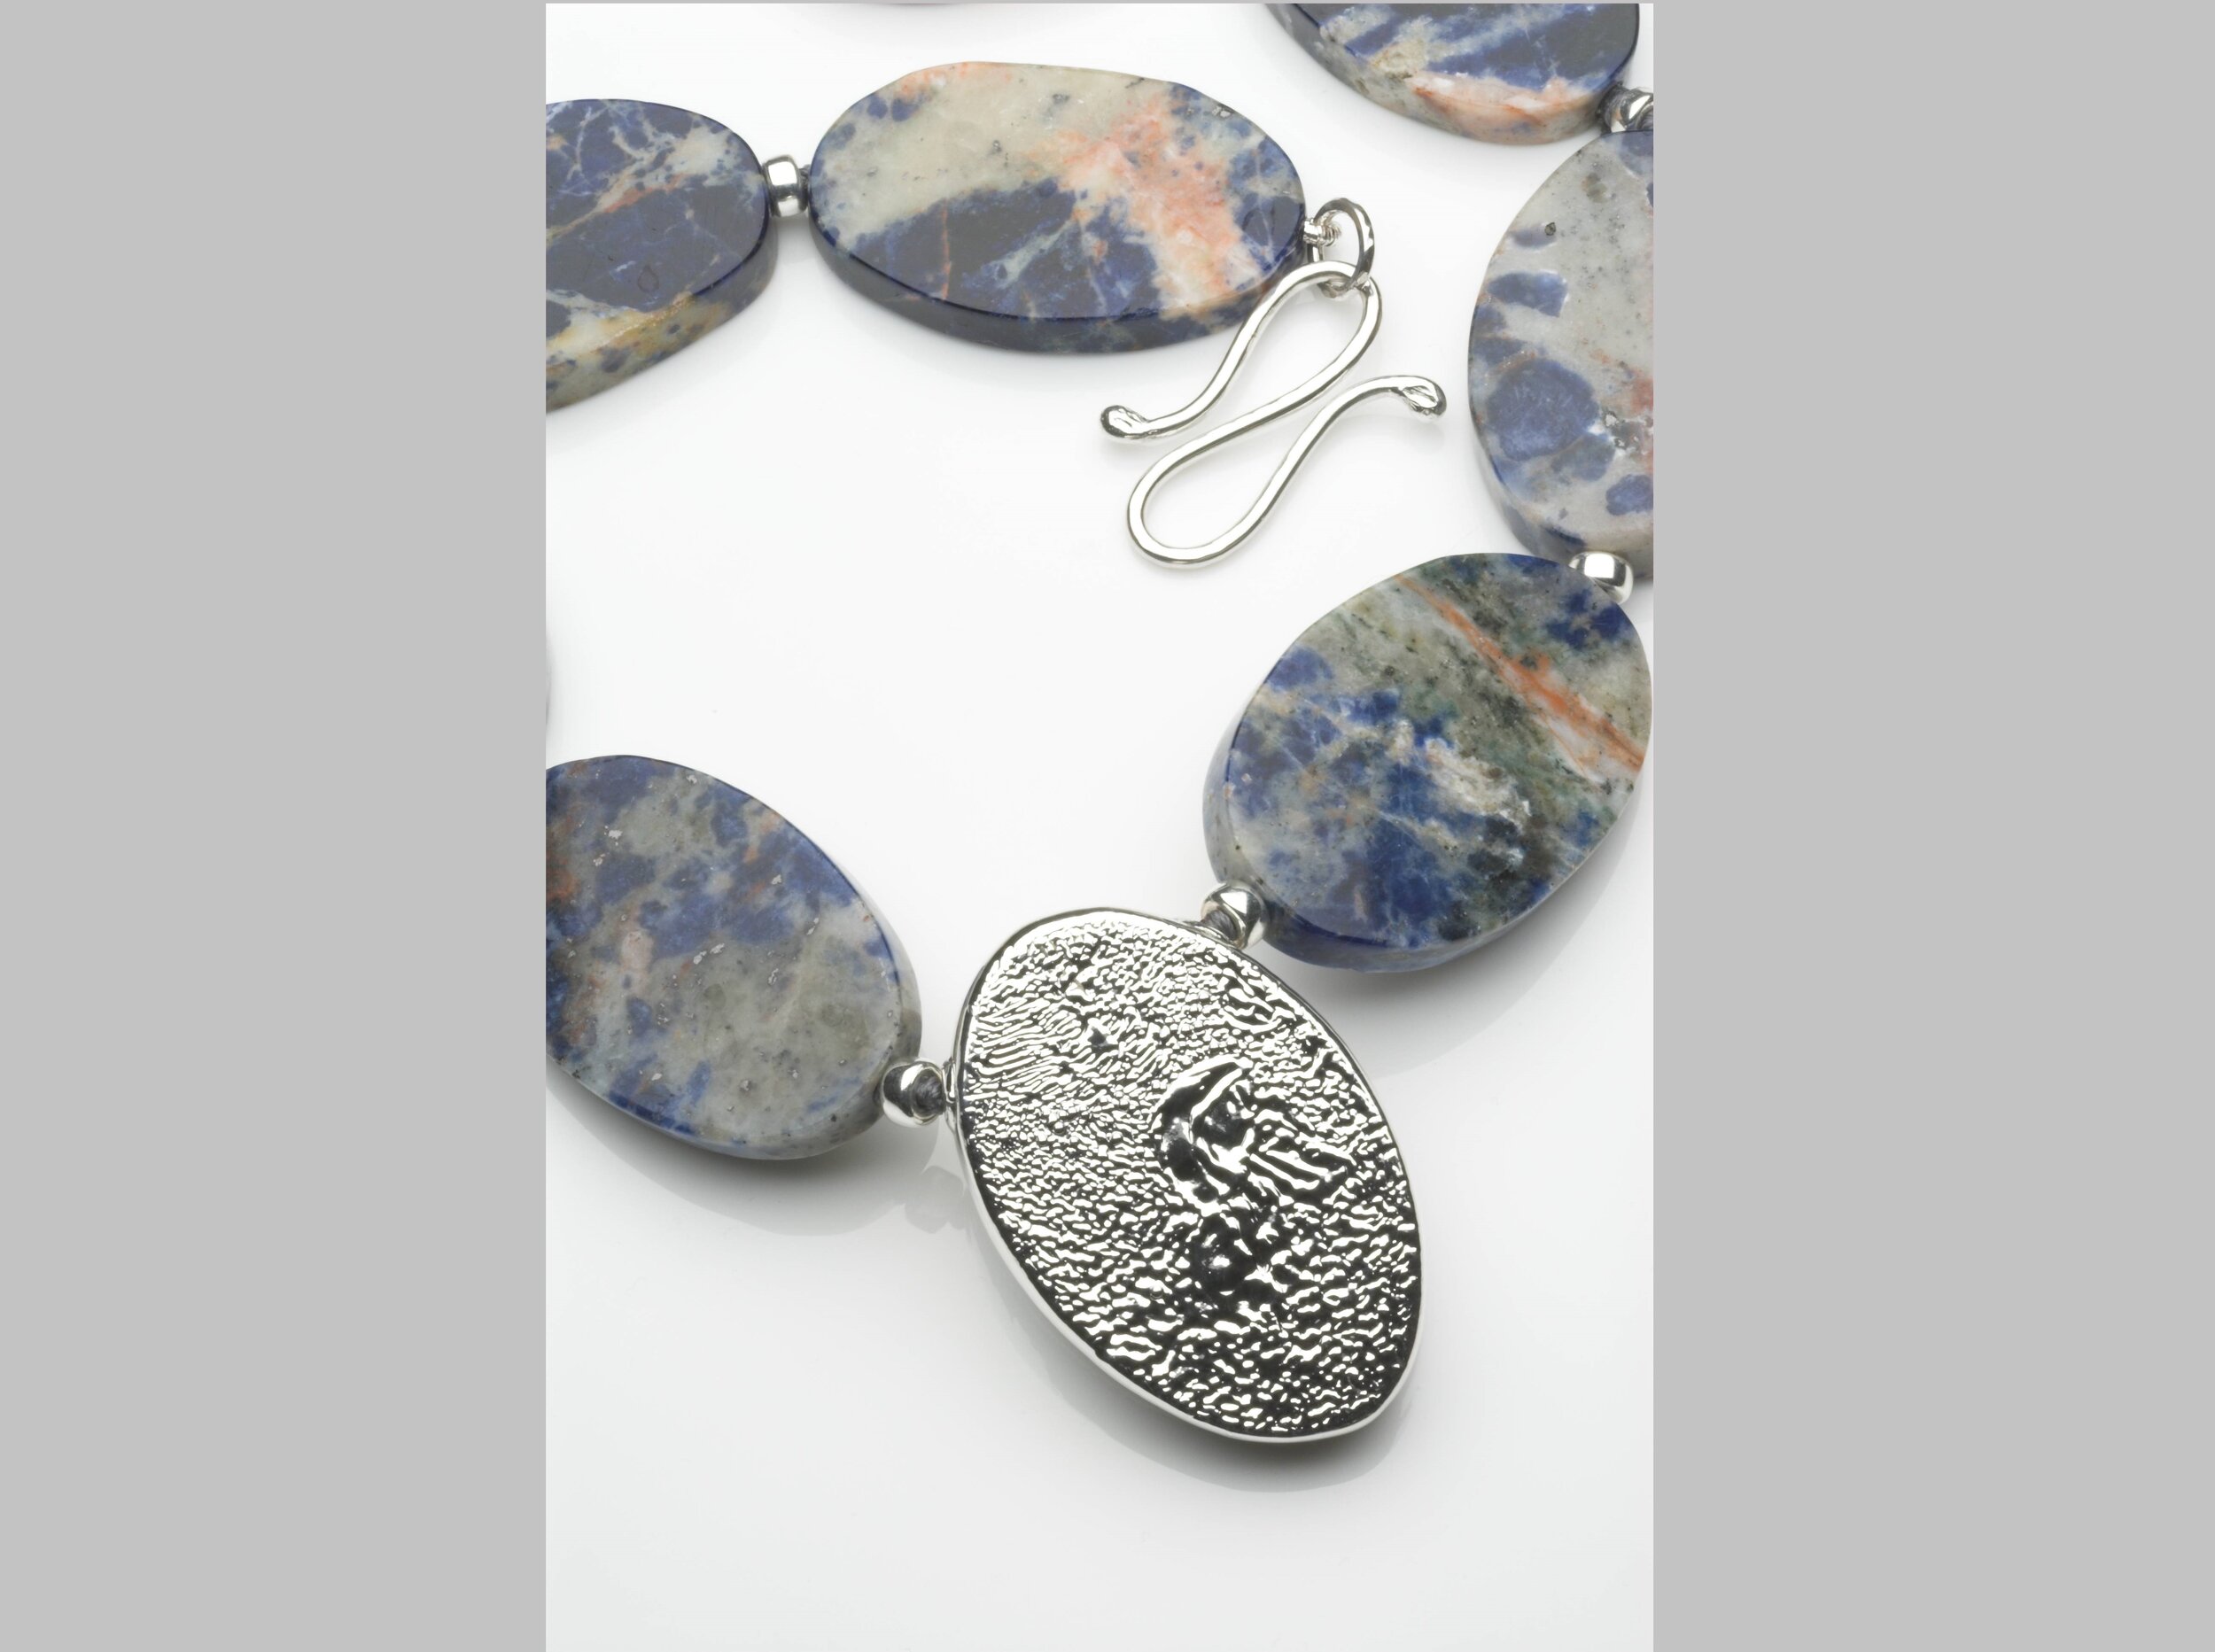 2.Sodalite Necklace with Silver hallmarked Pendant £775.jpg